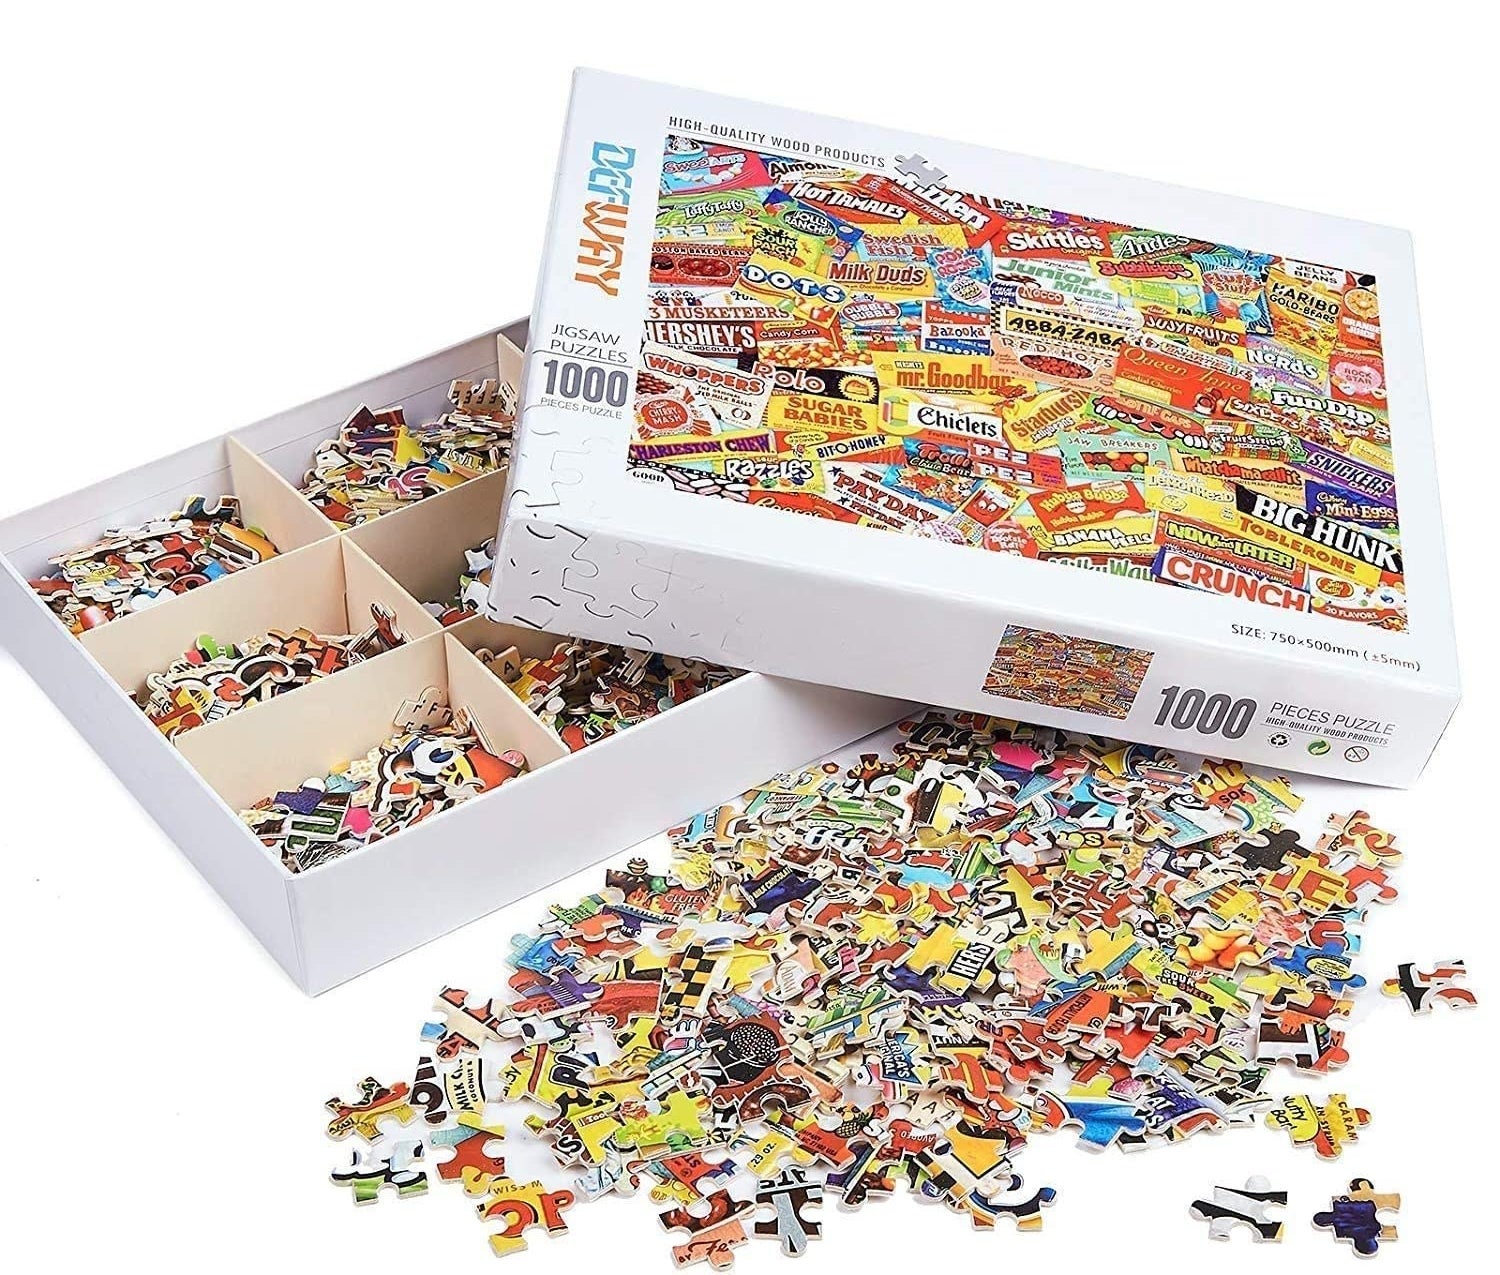 The puzzle box open with the pieces spilling out on a plain background